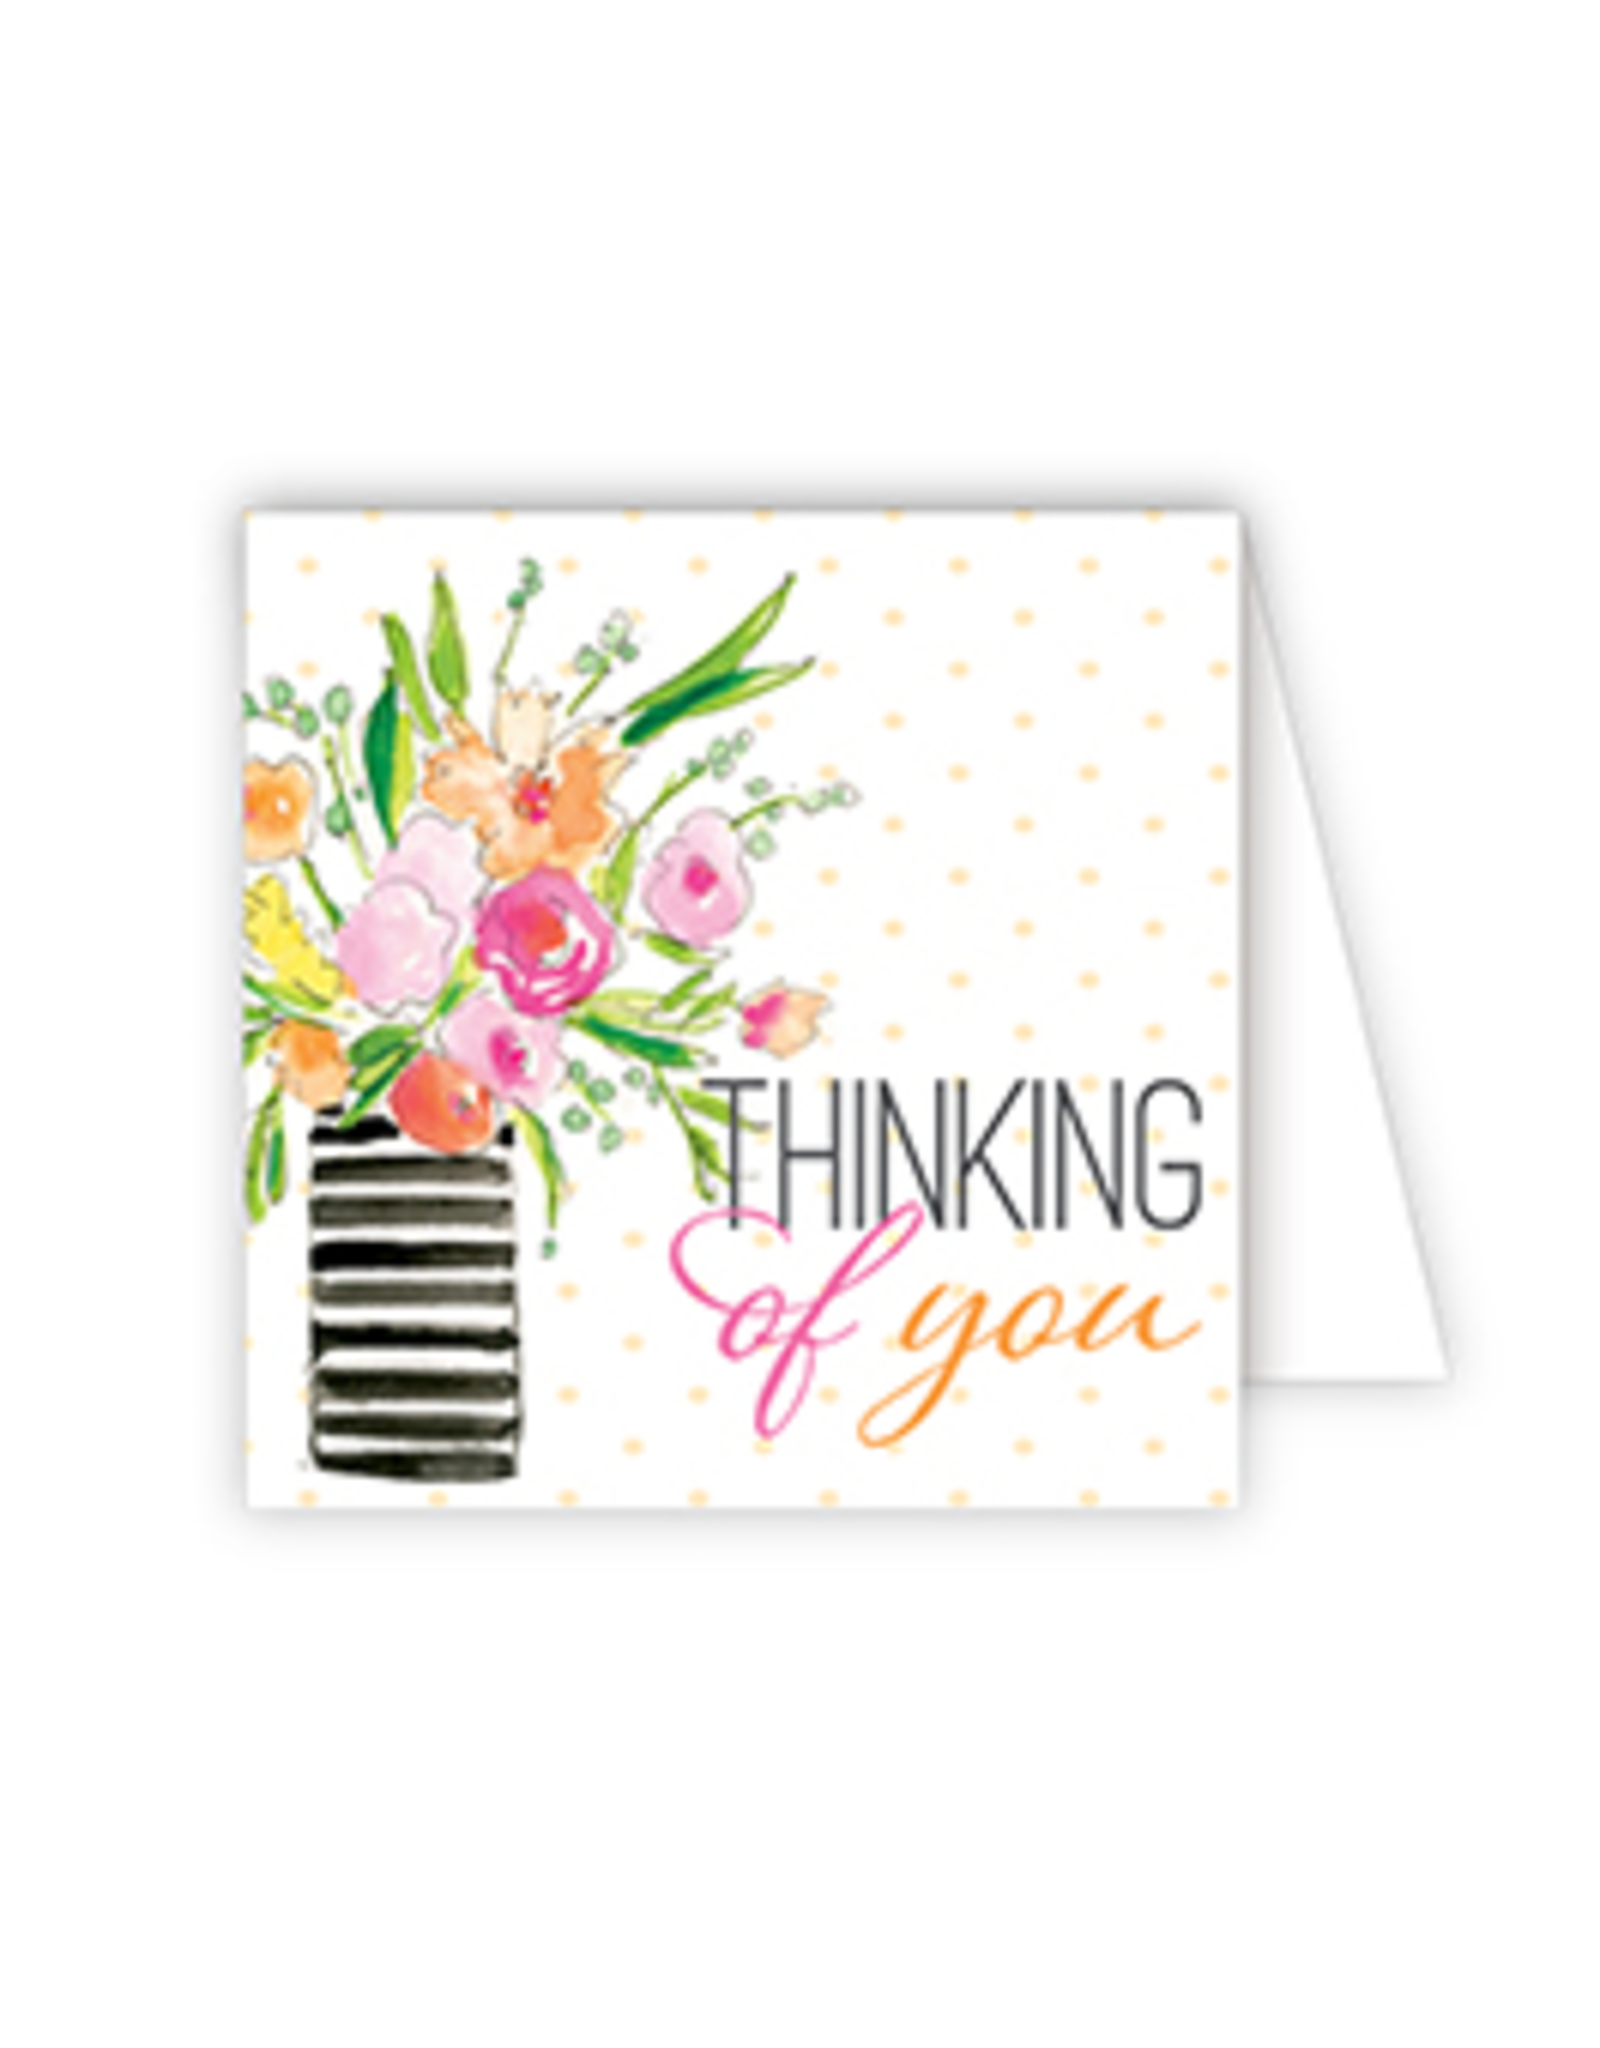 RoseanneBECK Collection Thinking of You Vase Flowers Enclosure Card